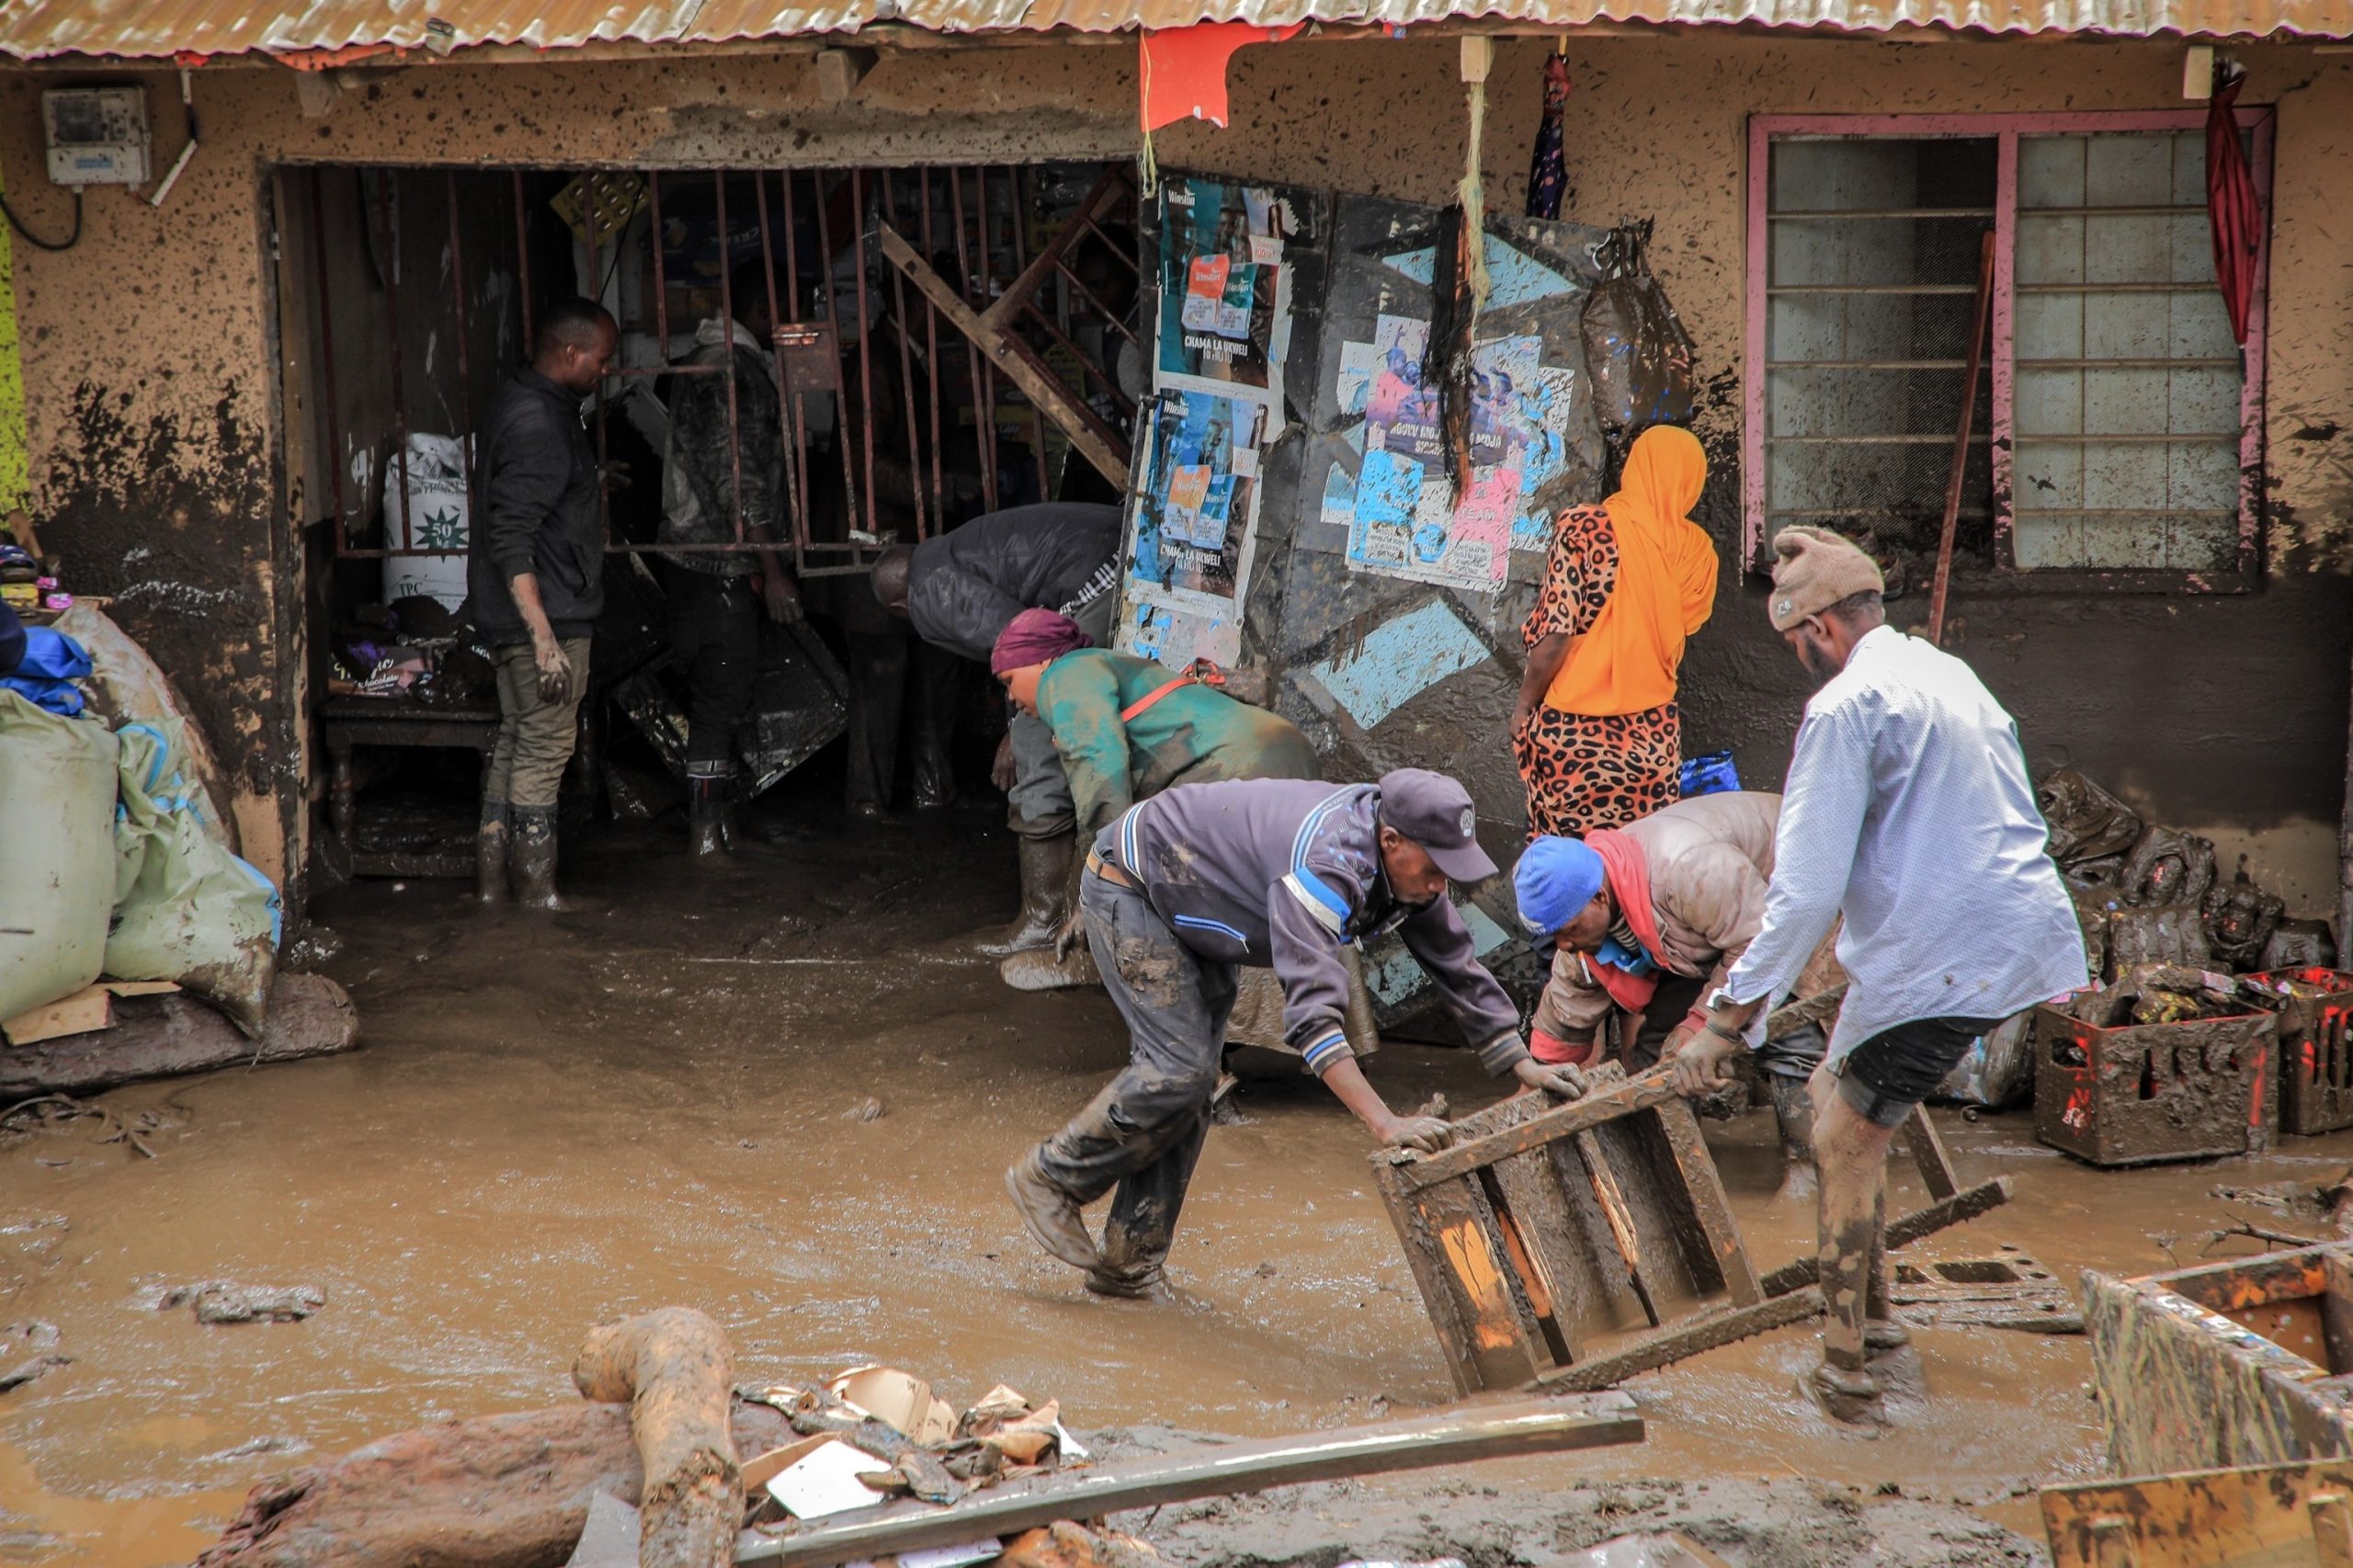 63 people killed in Tanzania due to flooding and landslides